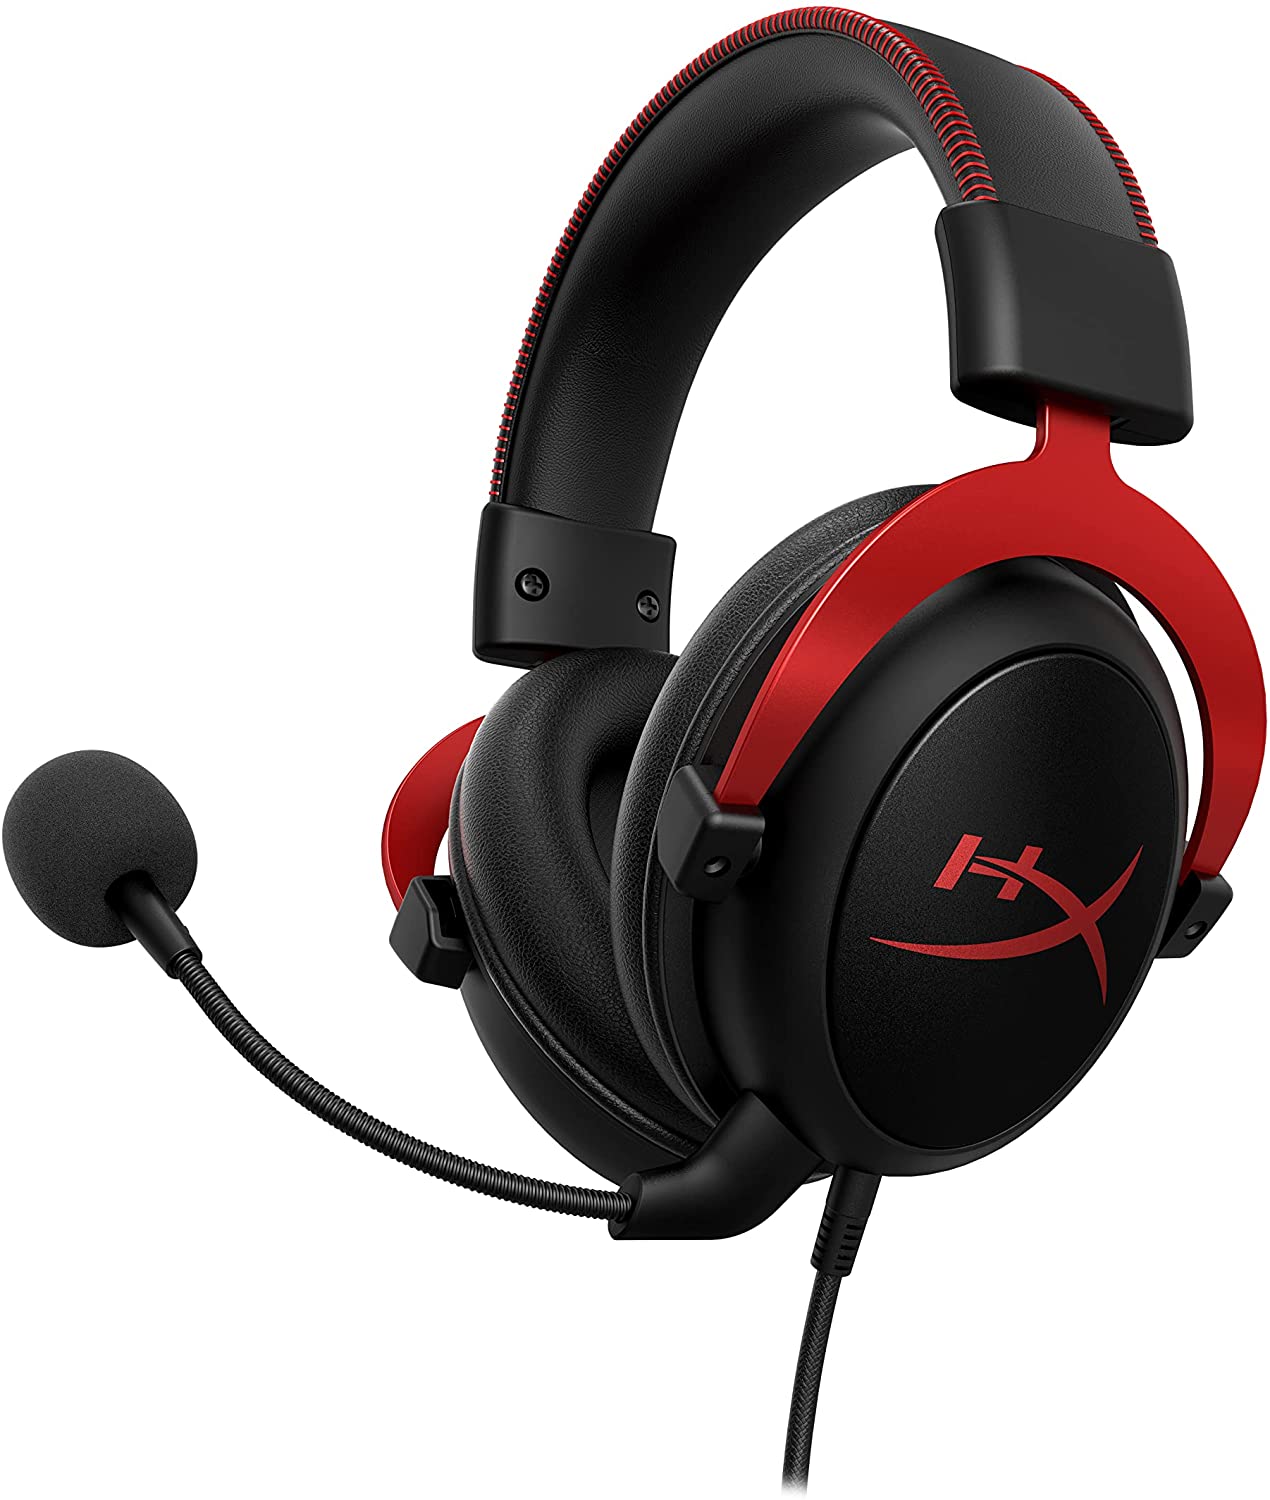 HyperX Cloud II Pro Wired Gaming Headset (Red/Black) $69.50 + Free Shipping